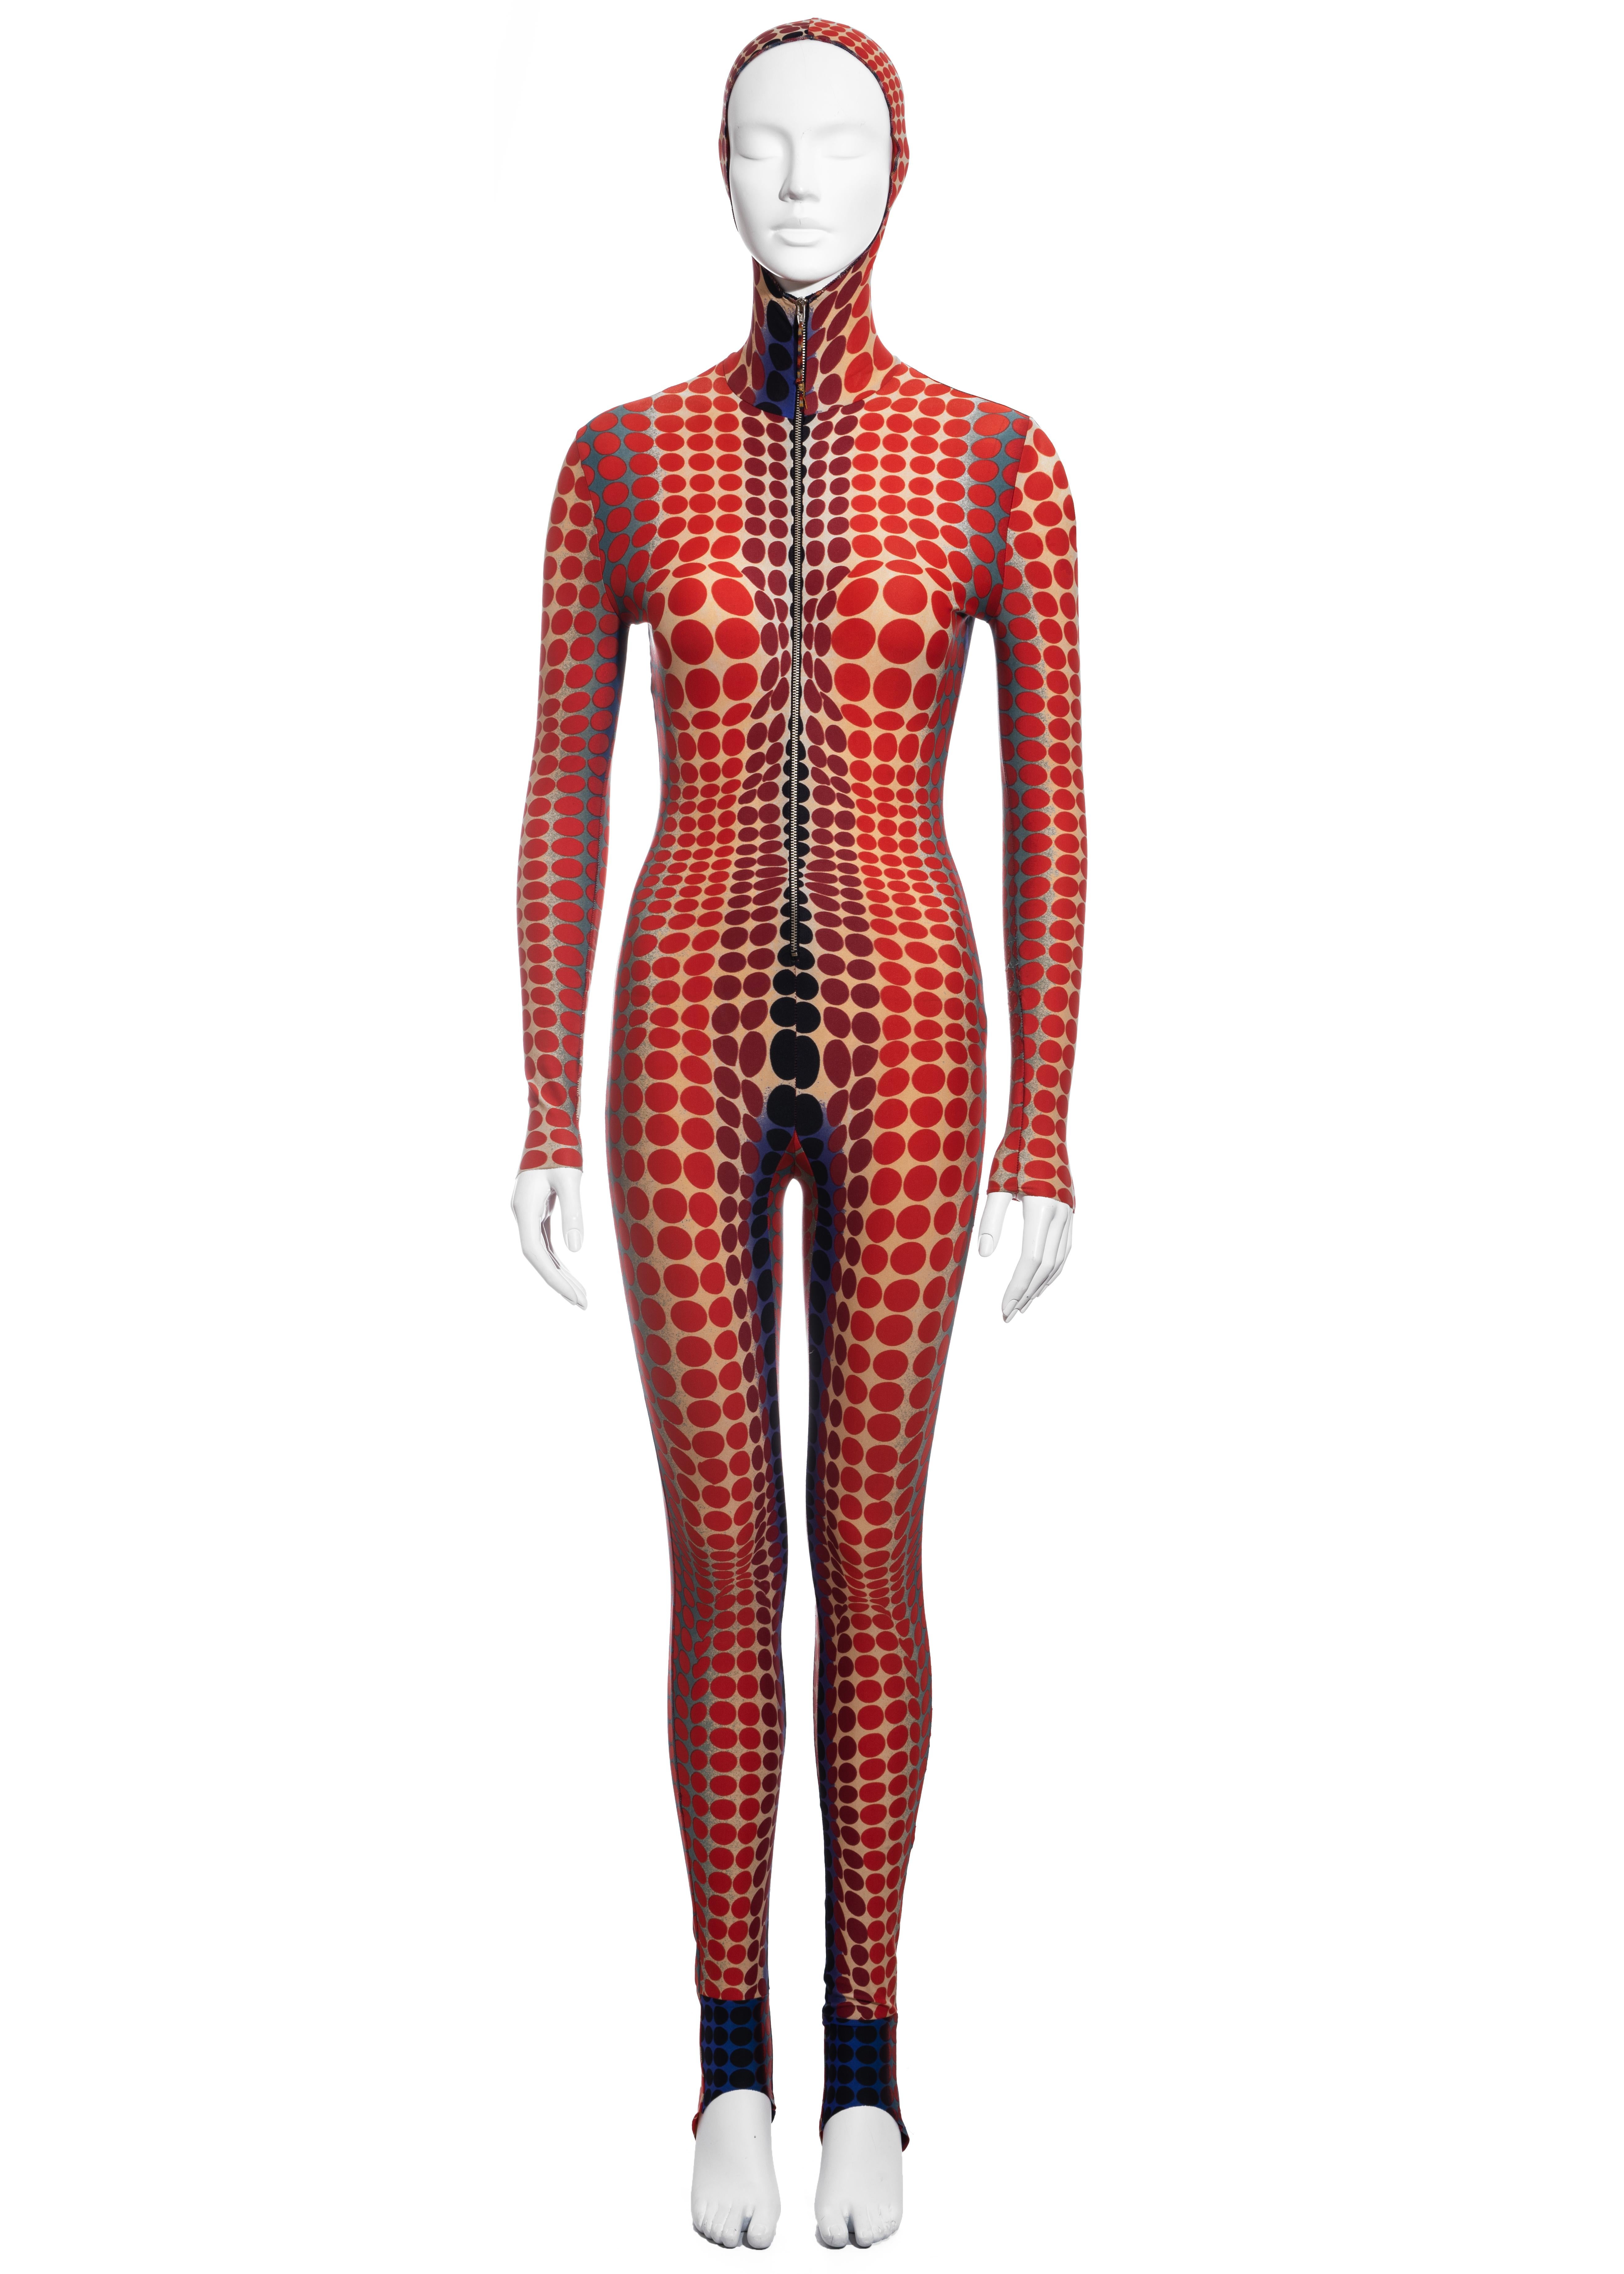 ▪ Jean Paul Gaultier red cyber dot catsuit  
▪ 78% Nylon, 22% Spandex 
▪ Victor Vasarely inspired print  
▪ Fitted hood 
▪ Front zip fastening  
▪ Size Medium 
▪ Fall-Winter 1995